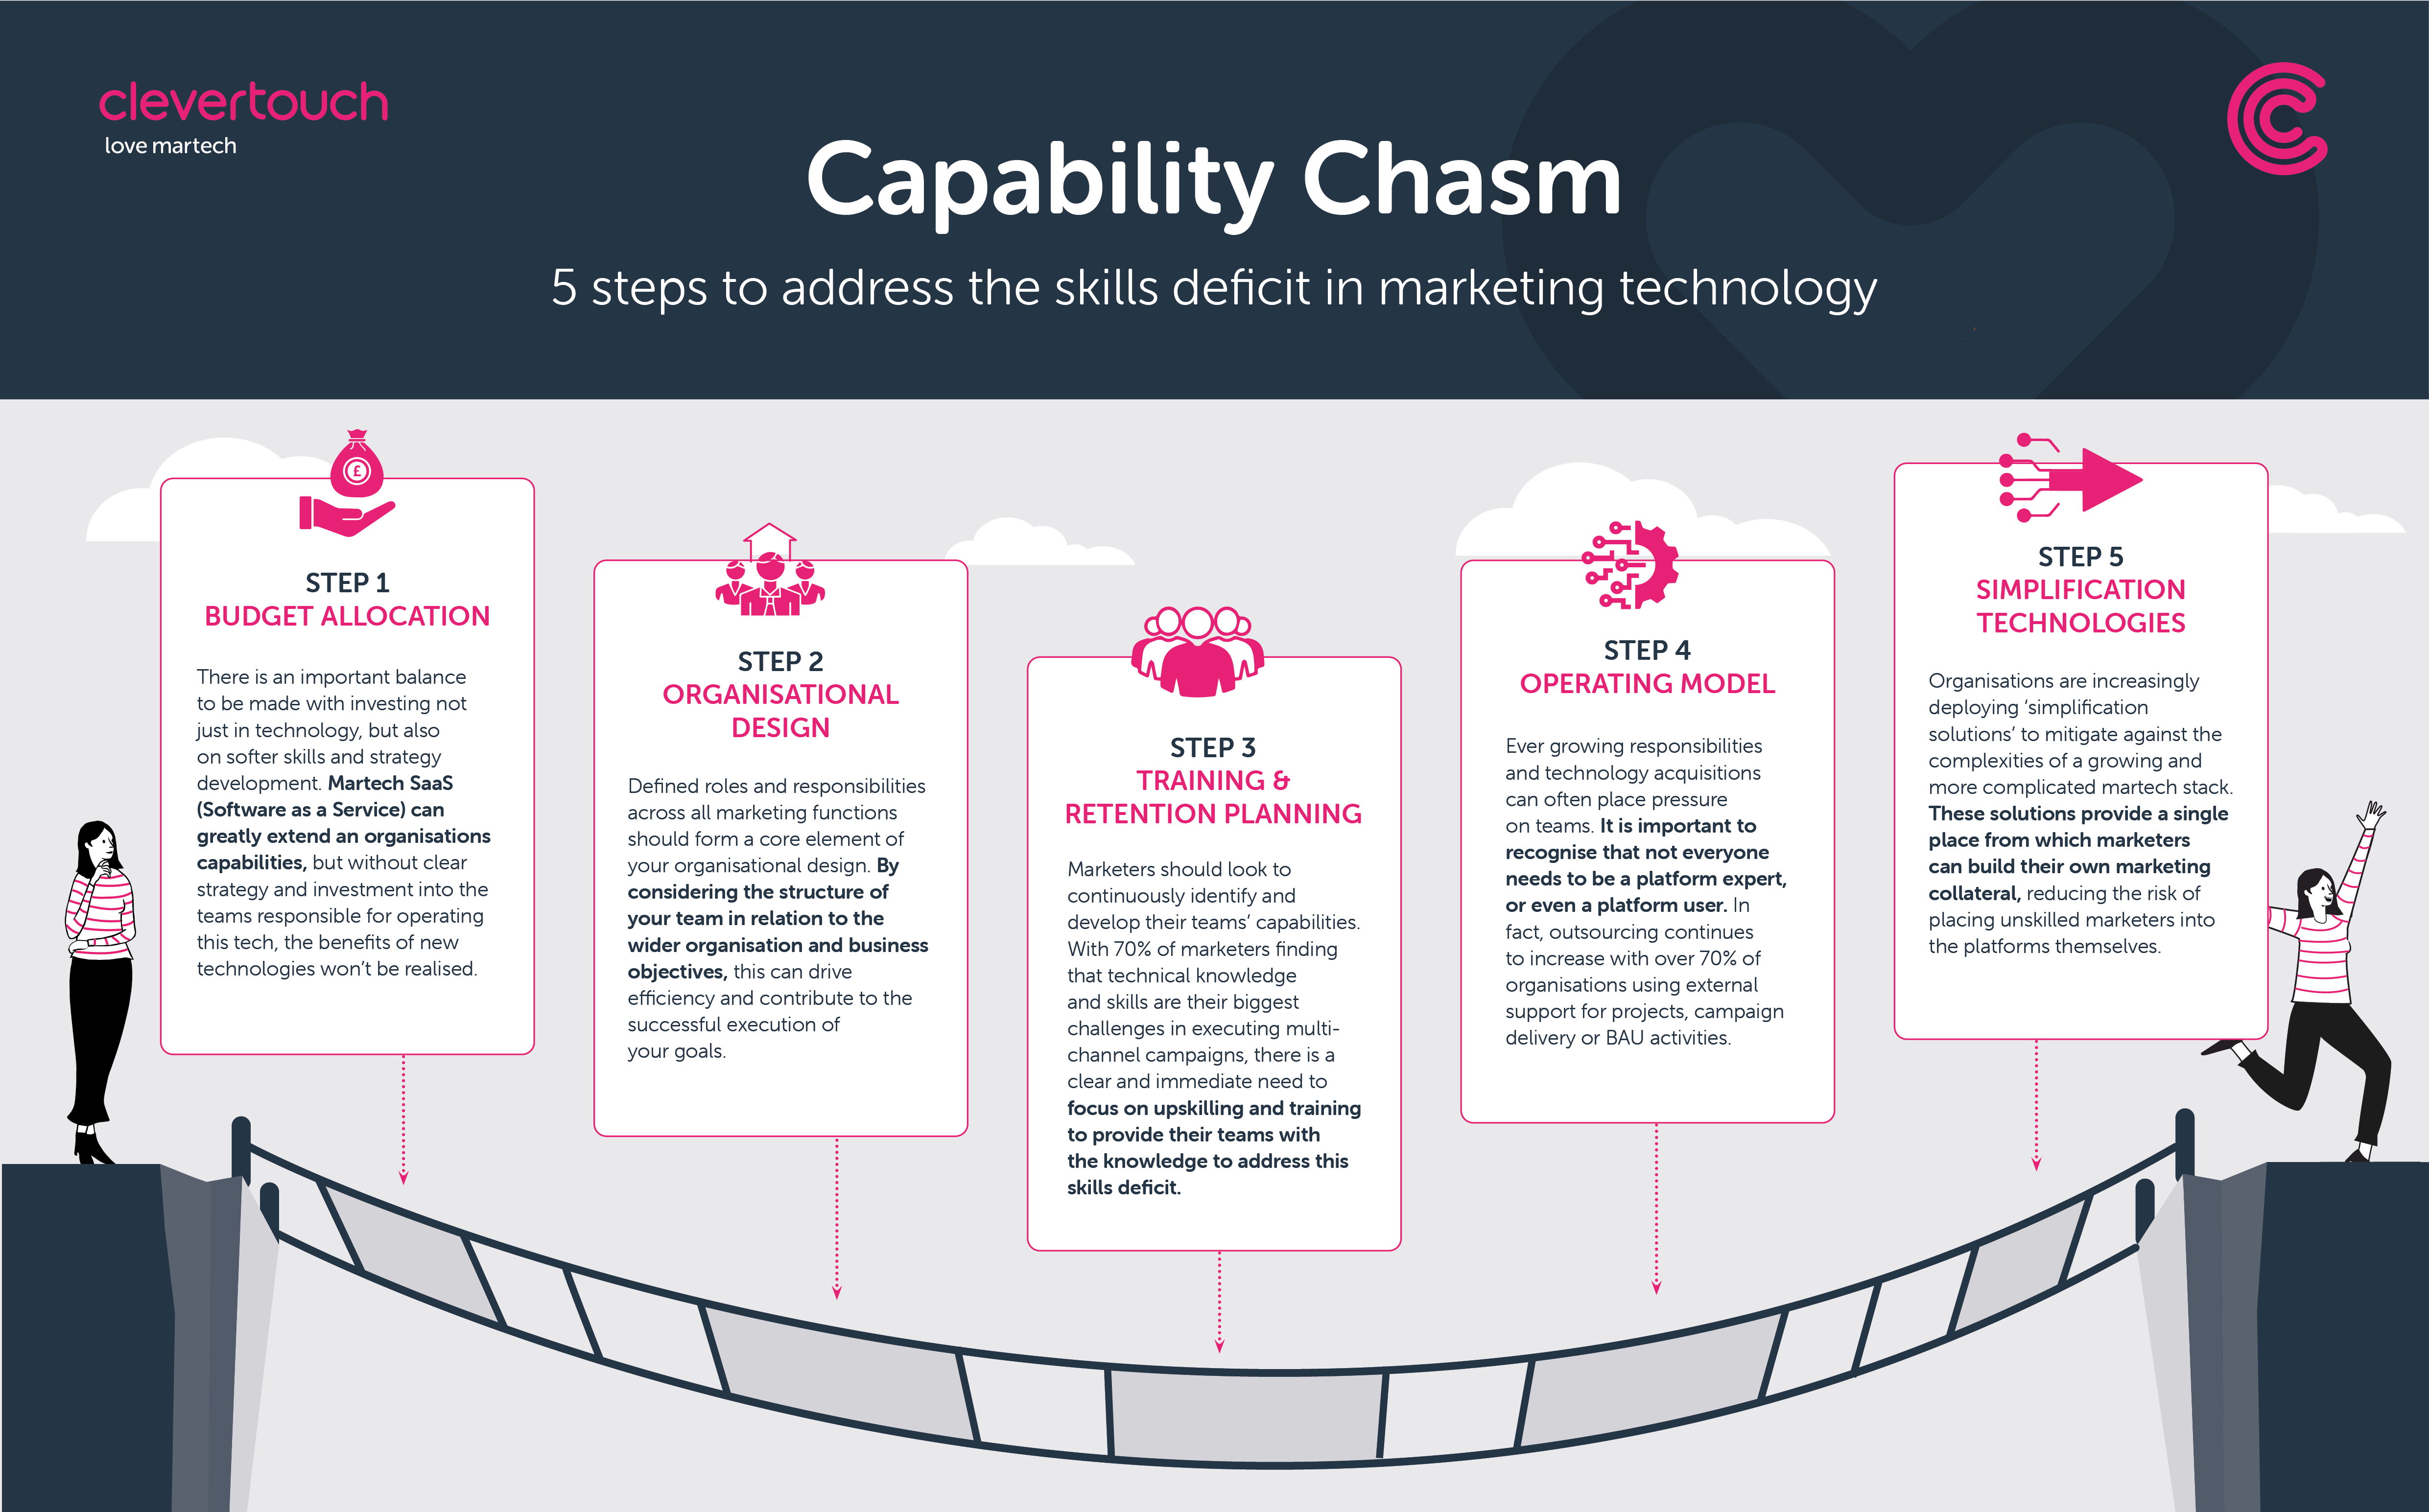 5 steps to address the skills deficit in marketing technology